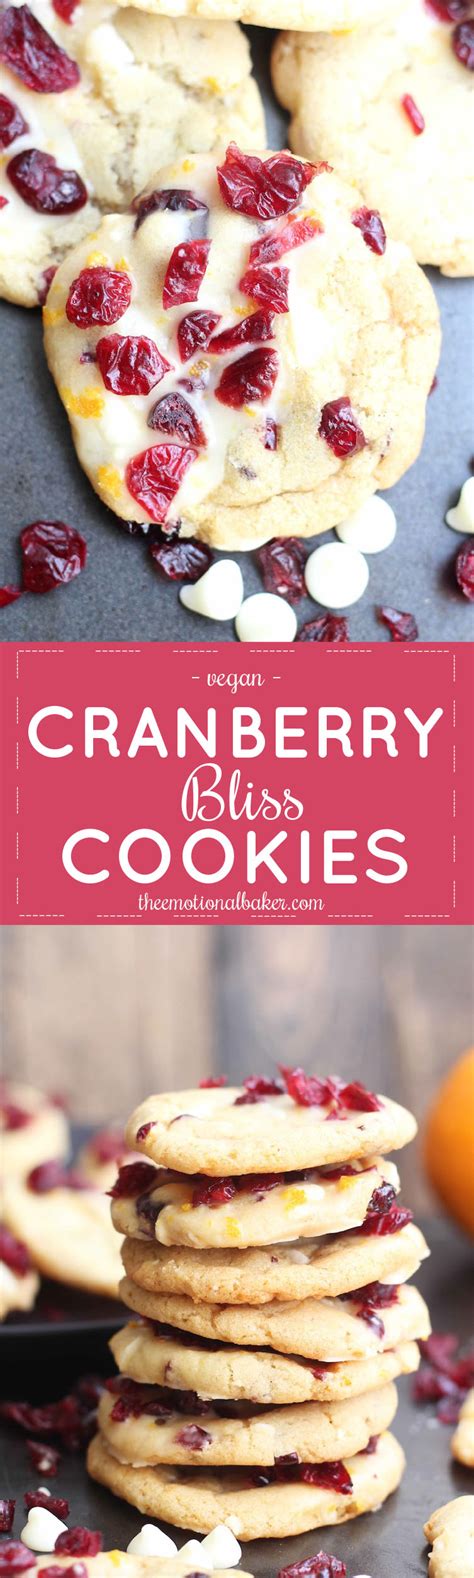 Cranberry Bliss Cookies The Emotional Baker